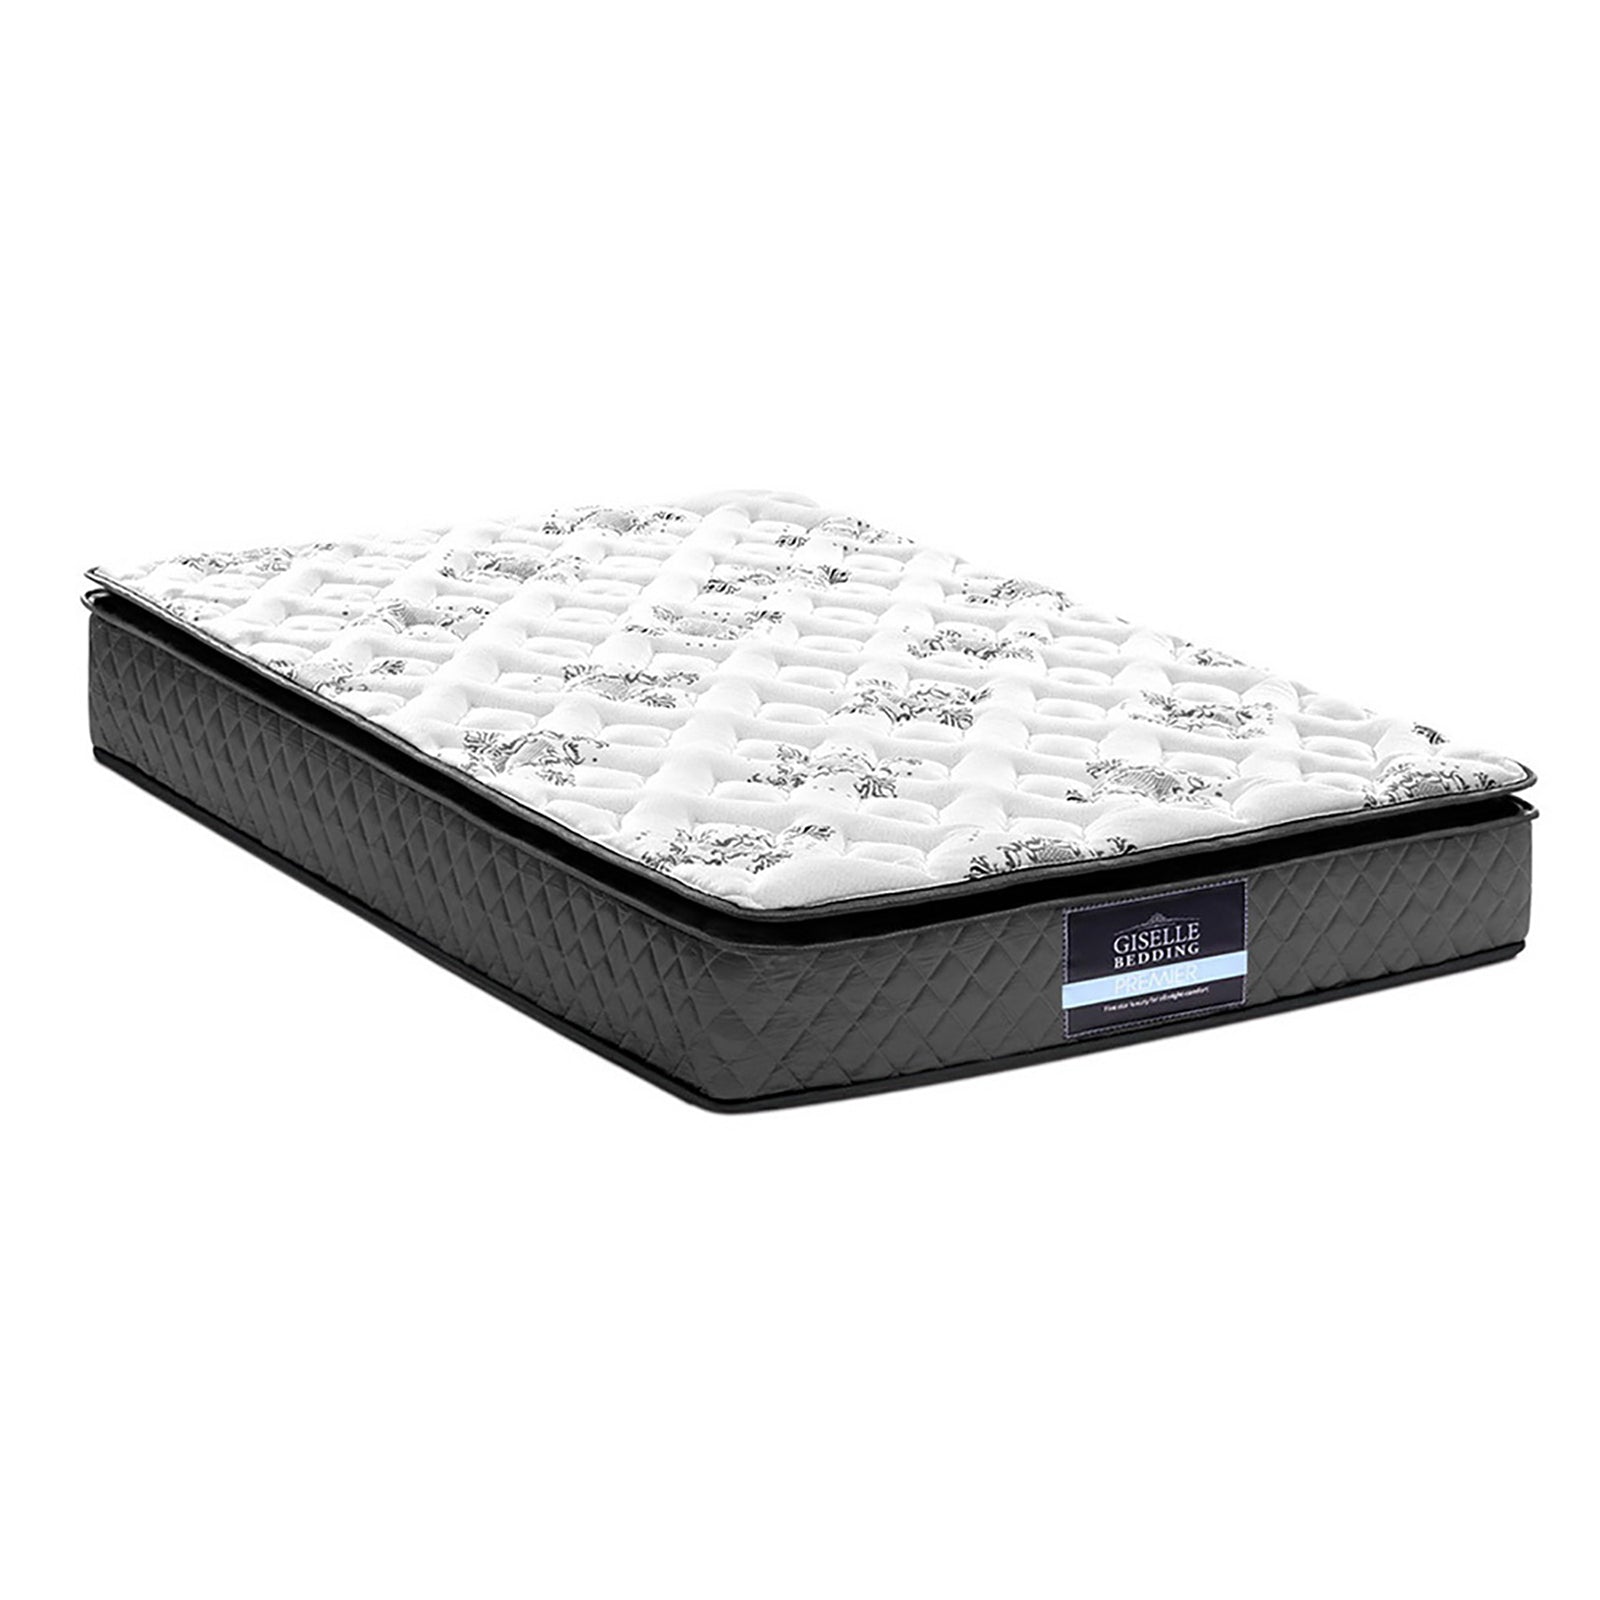 Giselle Bedding Rocco Bonnell Spring Mattress 24cm Thick King Single.